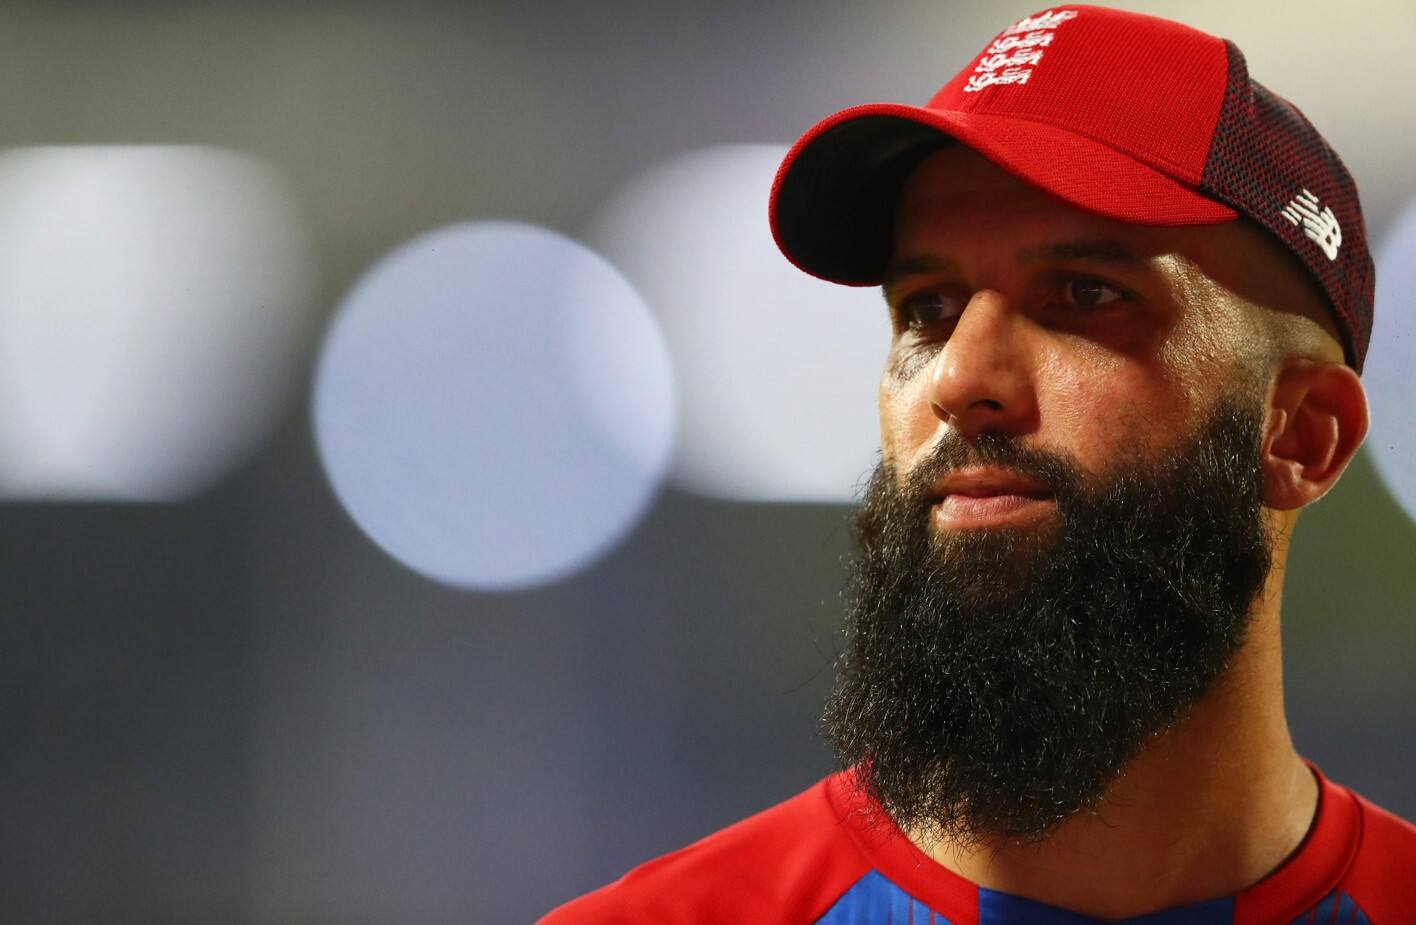 PAK vs ENG: Moeen Ali takes blame for humiliating defeat, says ‘gamble’ failed